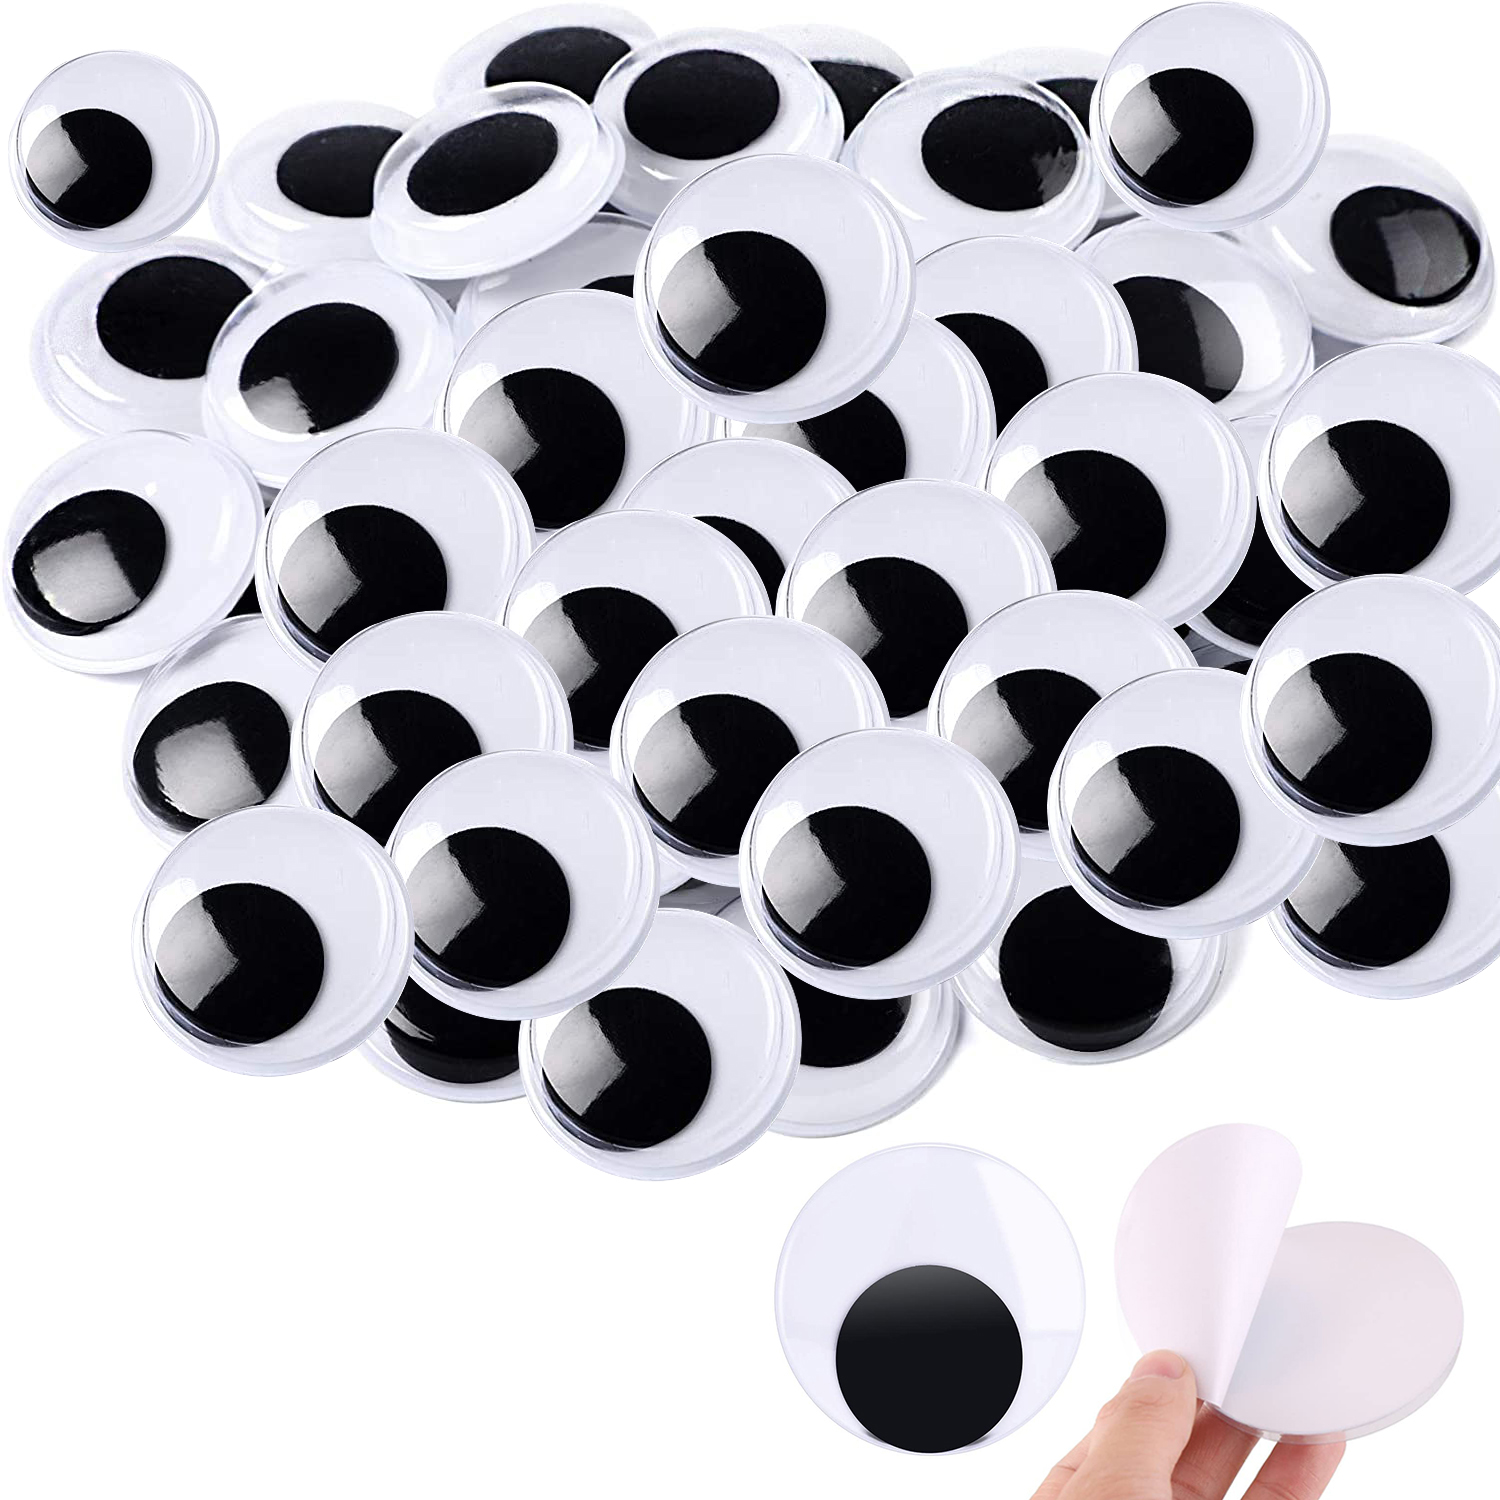 Gejoy Halloween Decorations 4 inch 3 inch 2 inch Wiggle Googly Google Eyes with Self Adhesive Large Black Googly Eyes for Crafts Set of 6